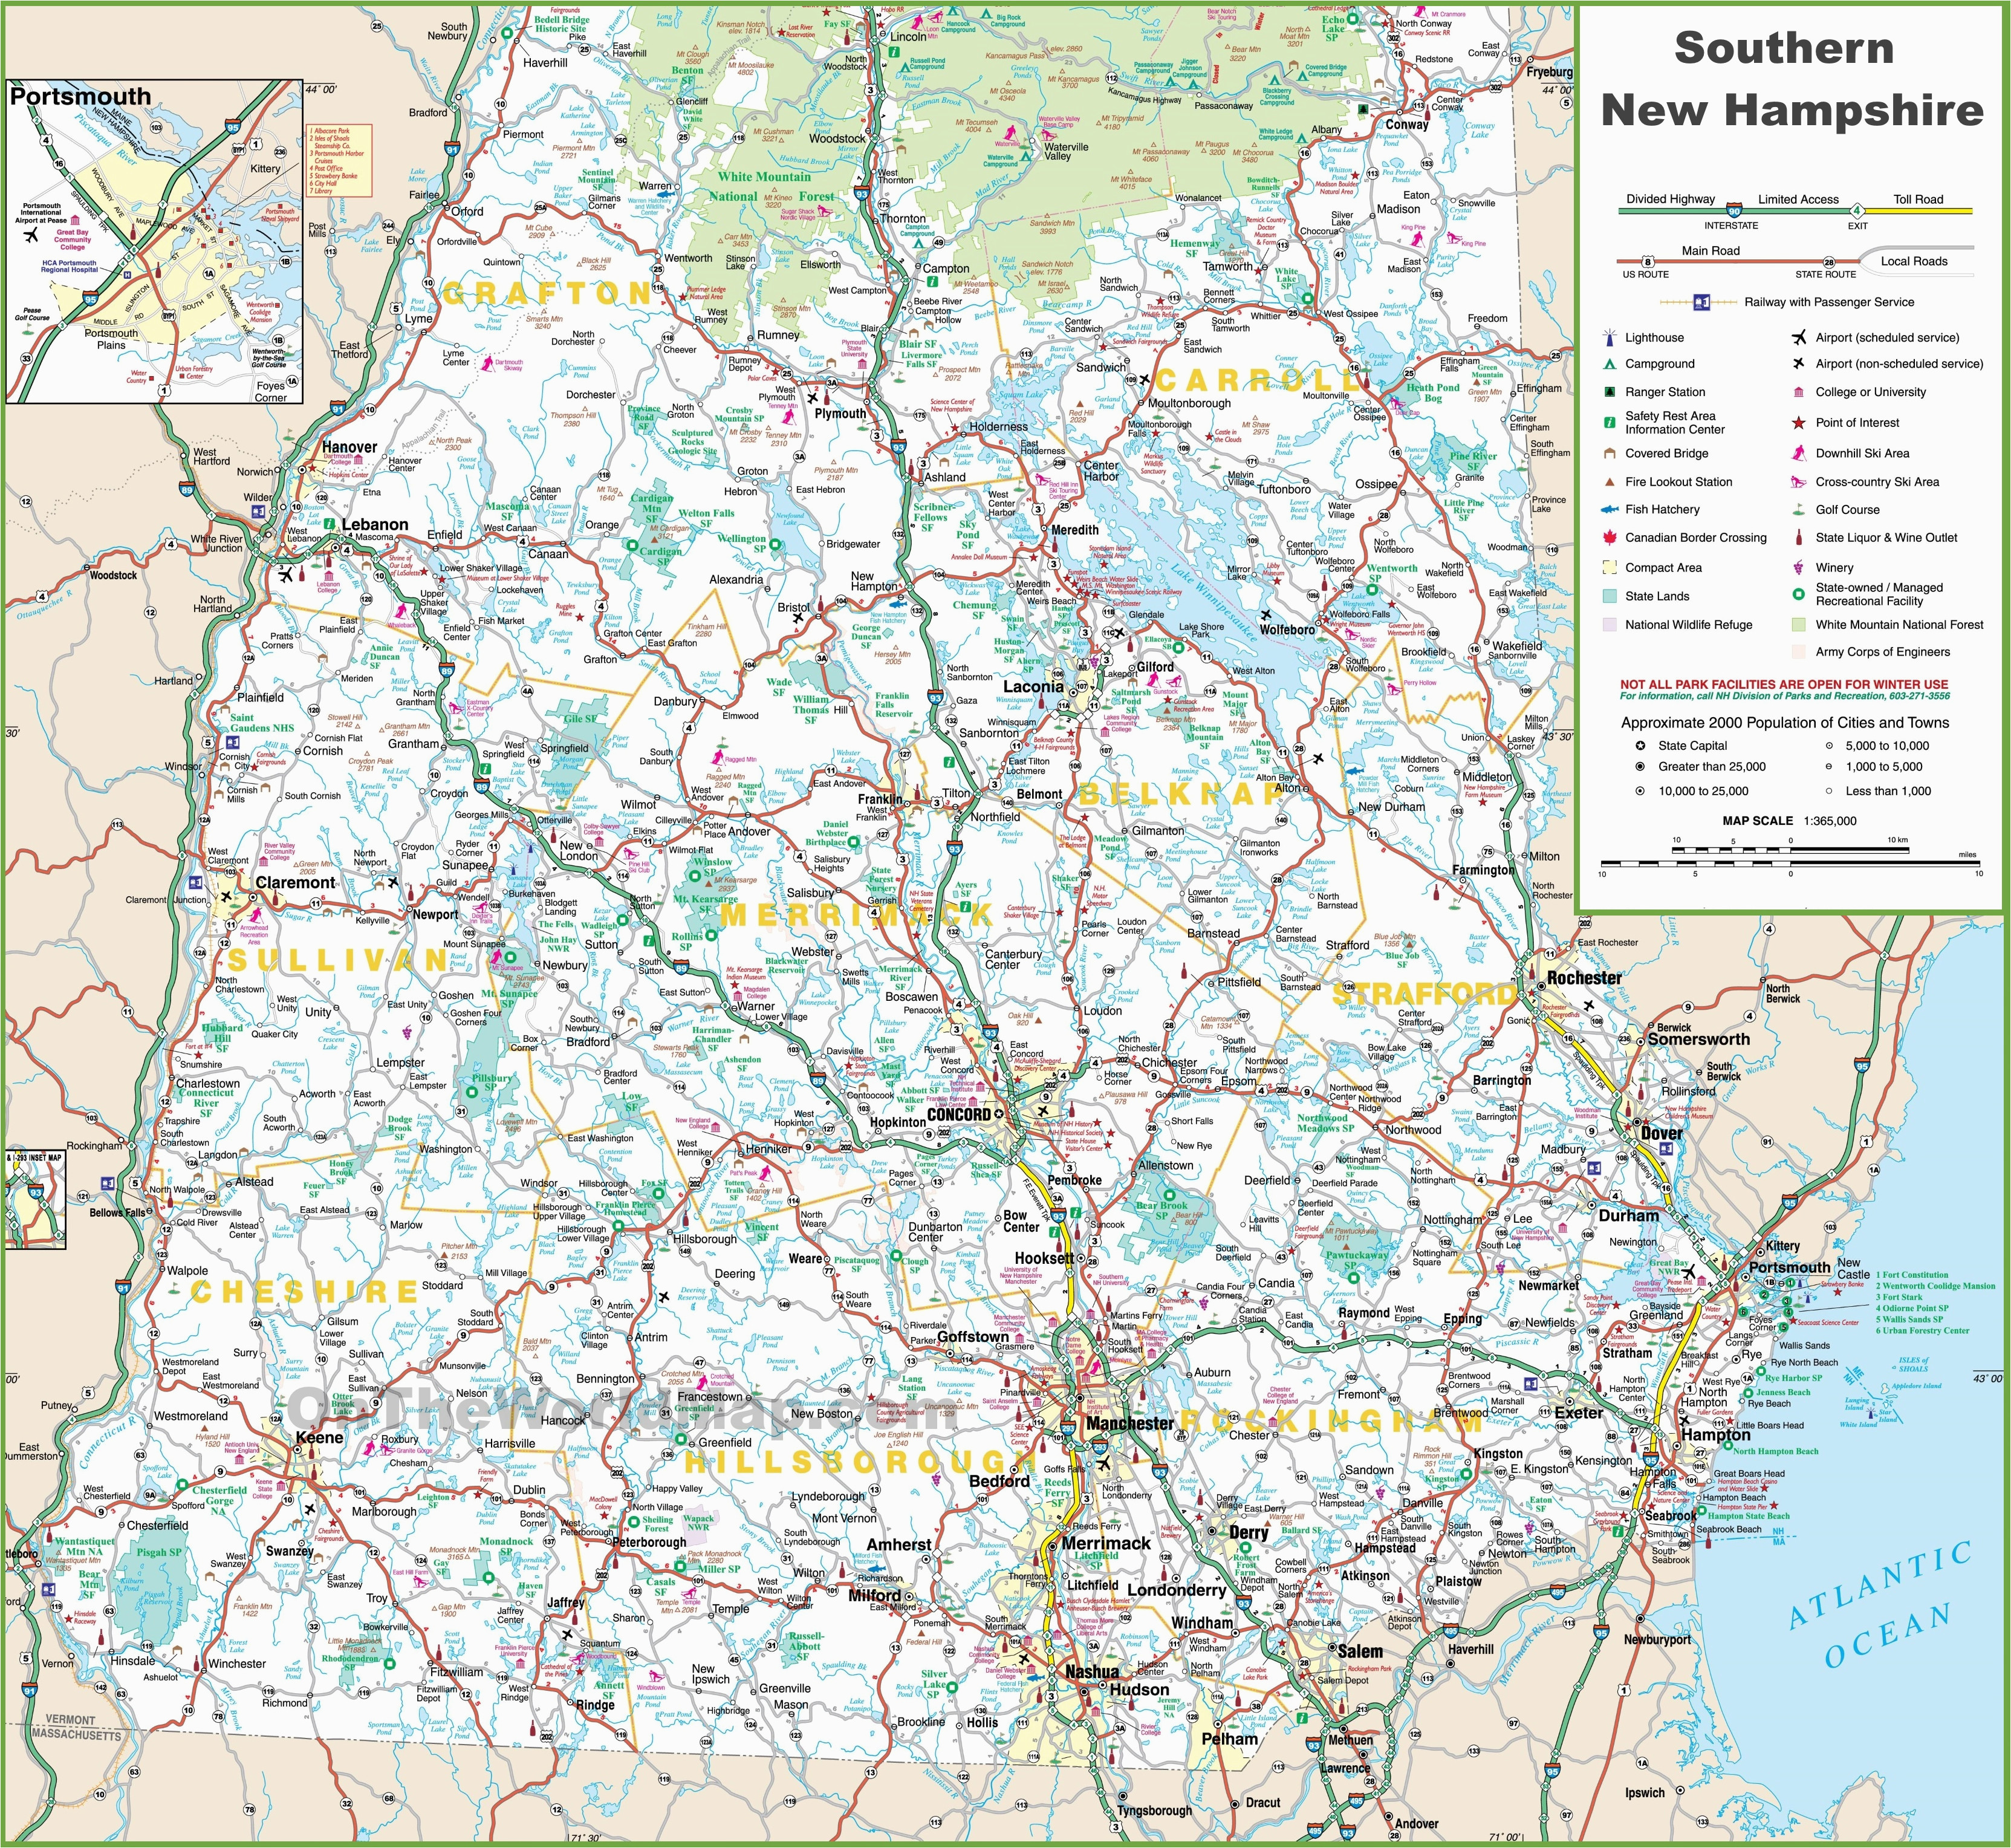 map of southern nh towns sitedesignco net